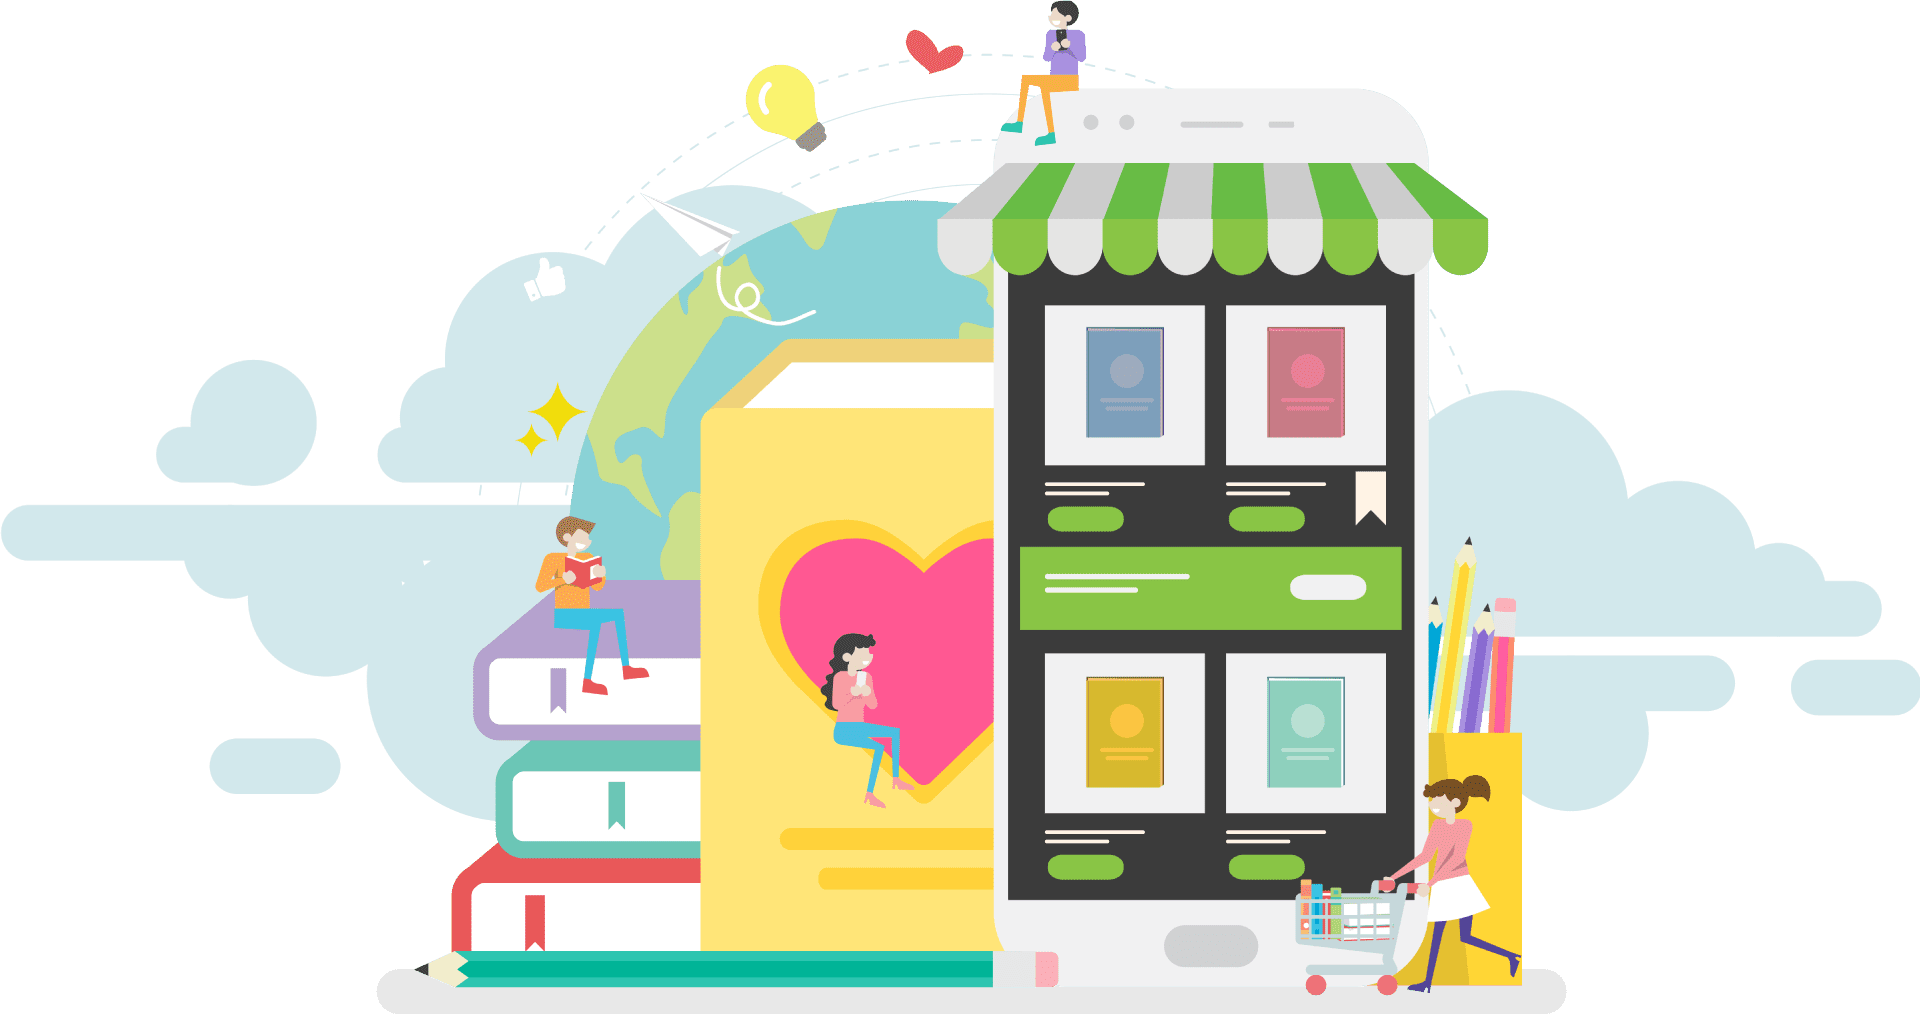 e commerce, online store, ecommerce business, ecommerce website, business to consumer b2c